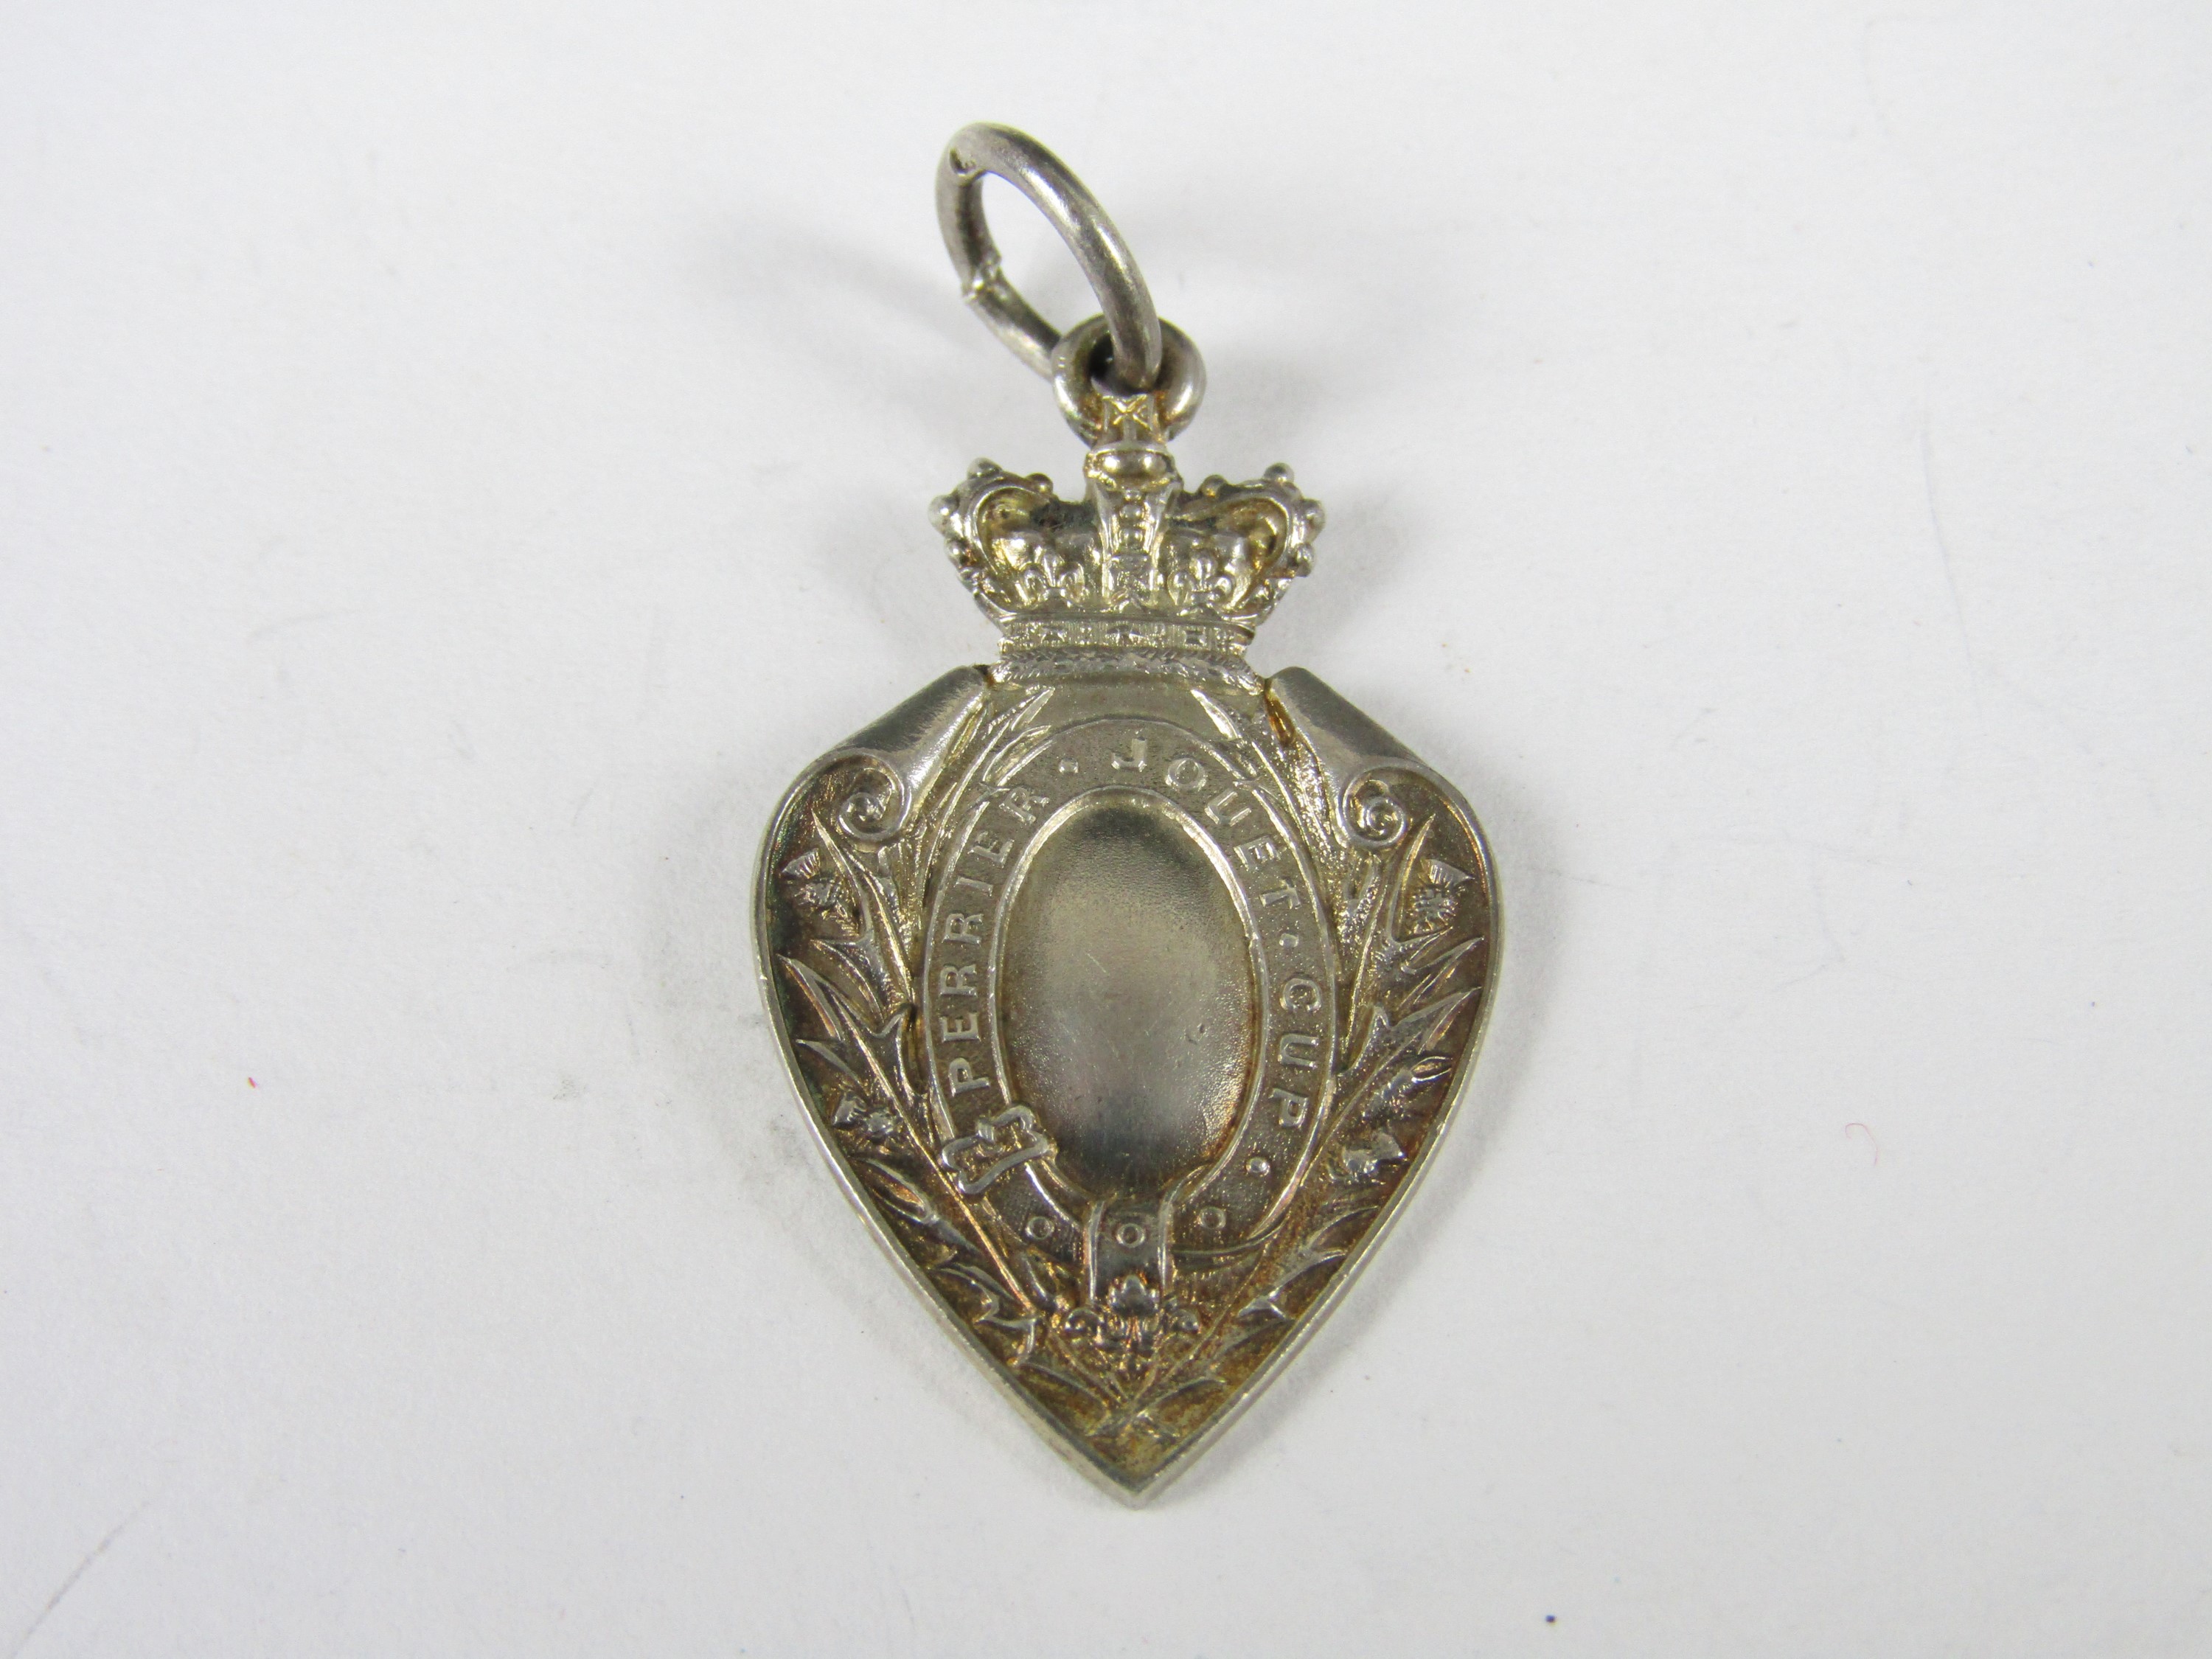 An Edwardian silver Perrier Jouet Cup prize fob medallion awarded to 3rd L R V, Liet W Gillespie,